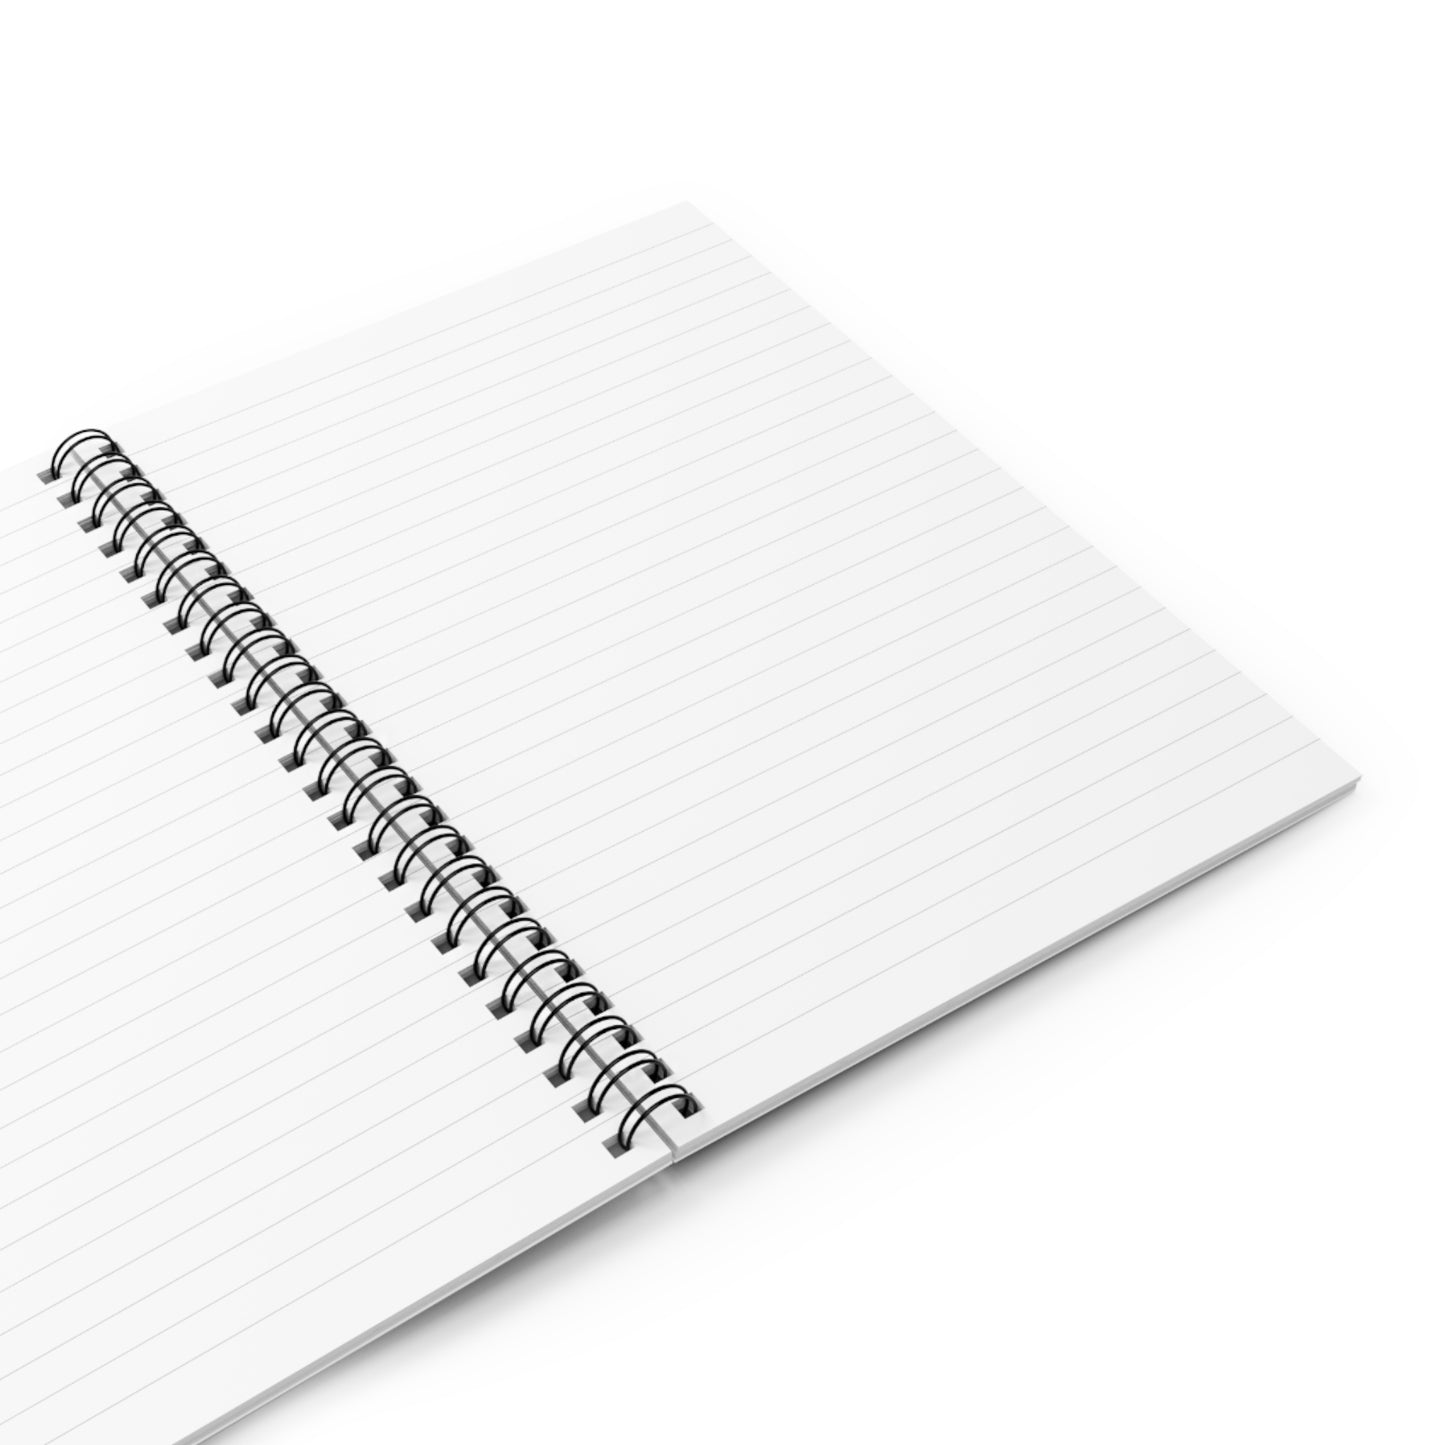 Elevate Your Essence Blank Spiral Notebook - Ruled Line